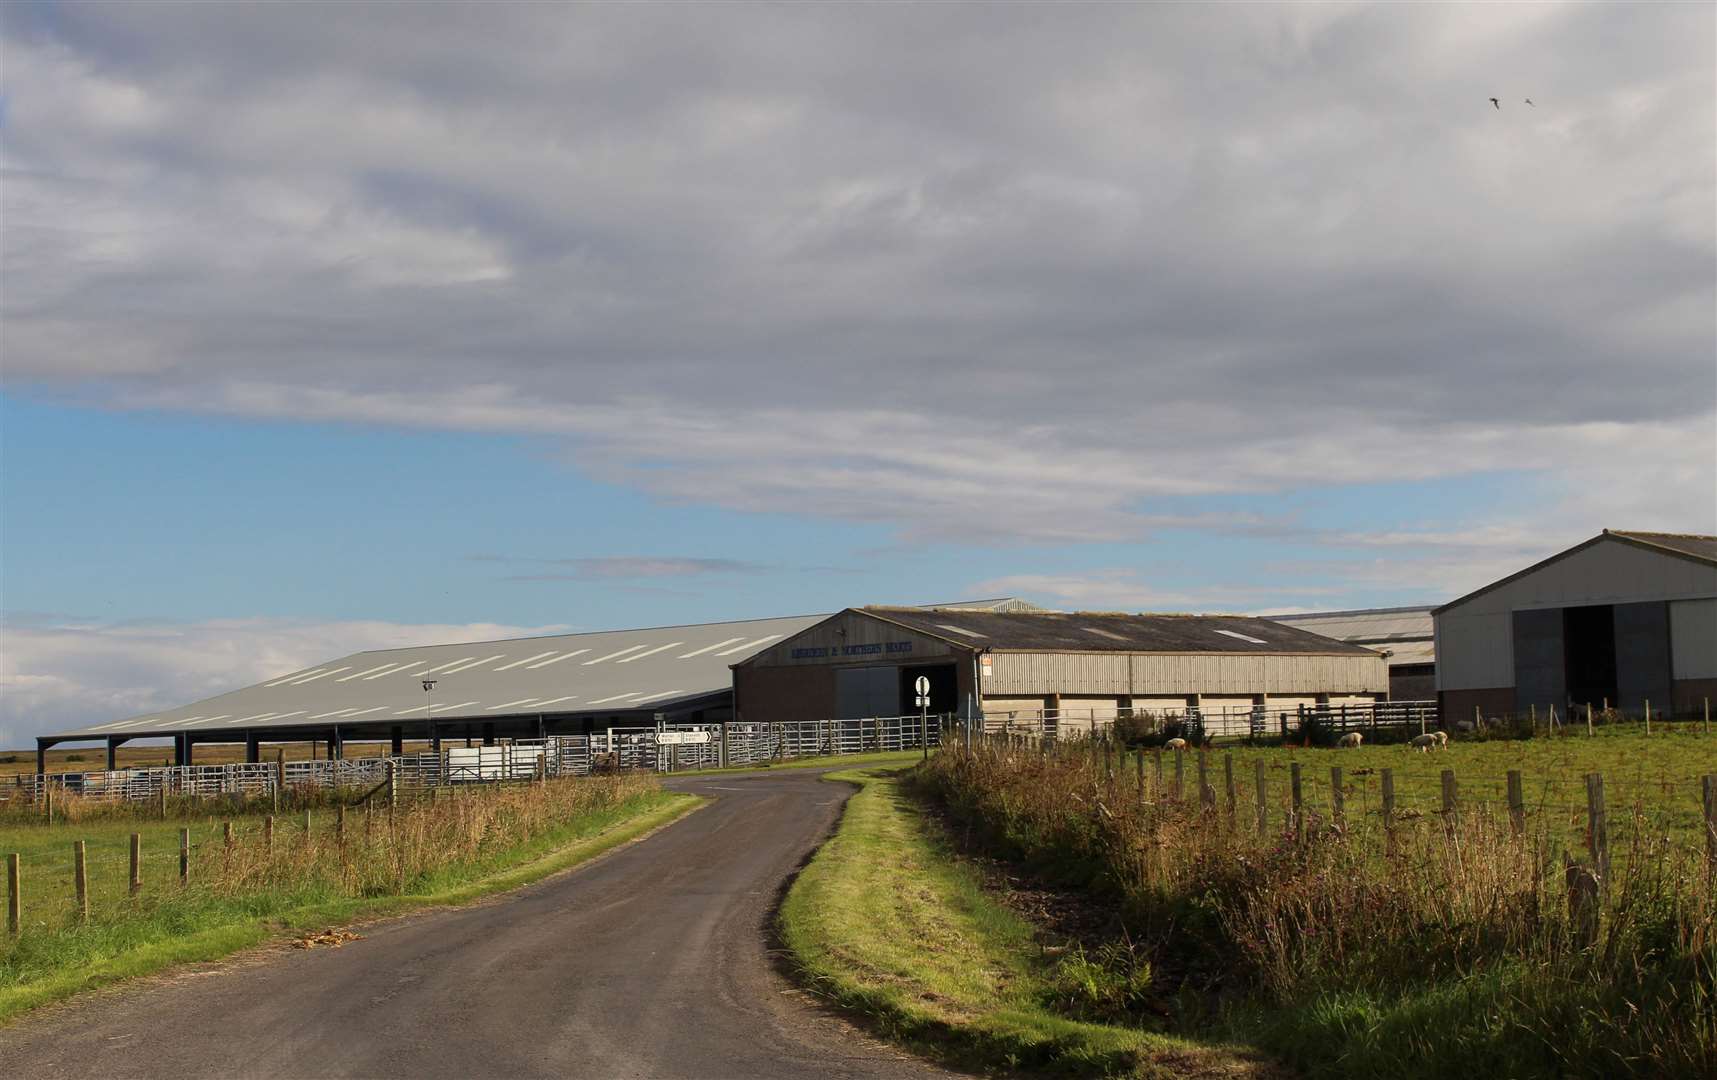 Quoybrae mart in Caithness.